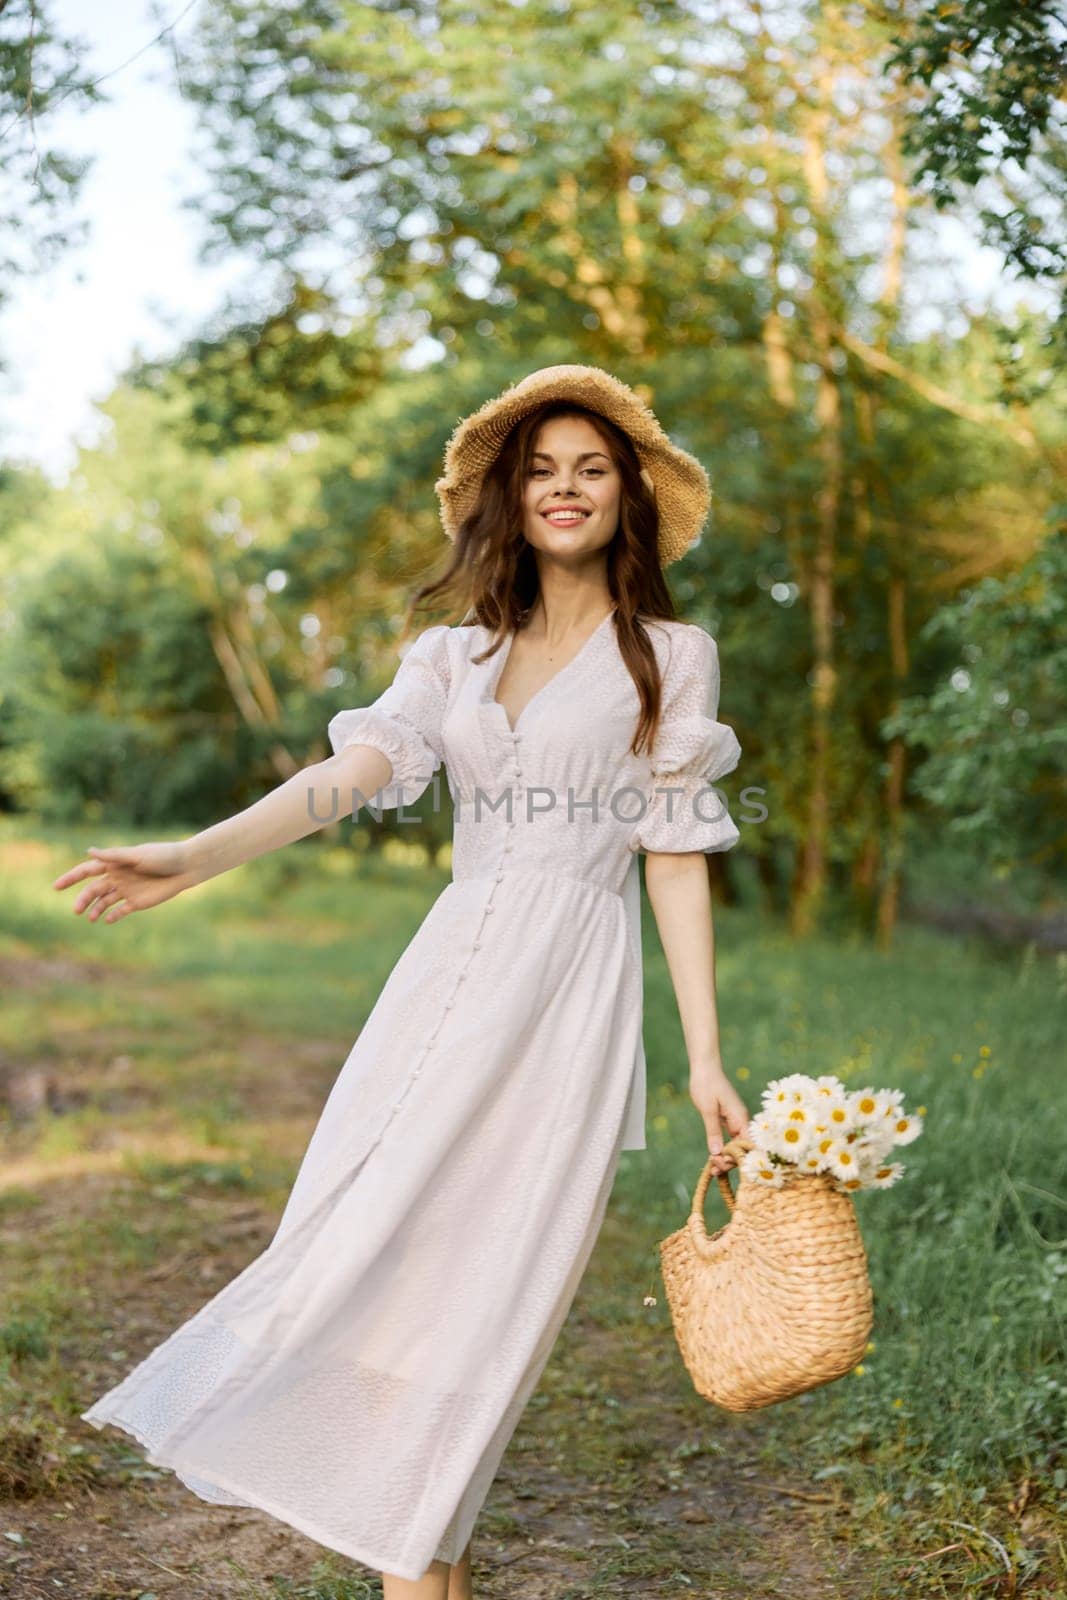 happy woman in a light dress smiles joyfully walking through the forest. High quality photo